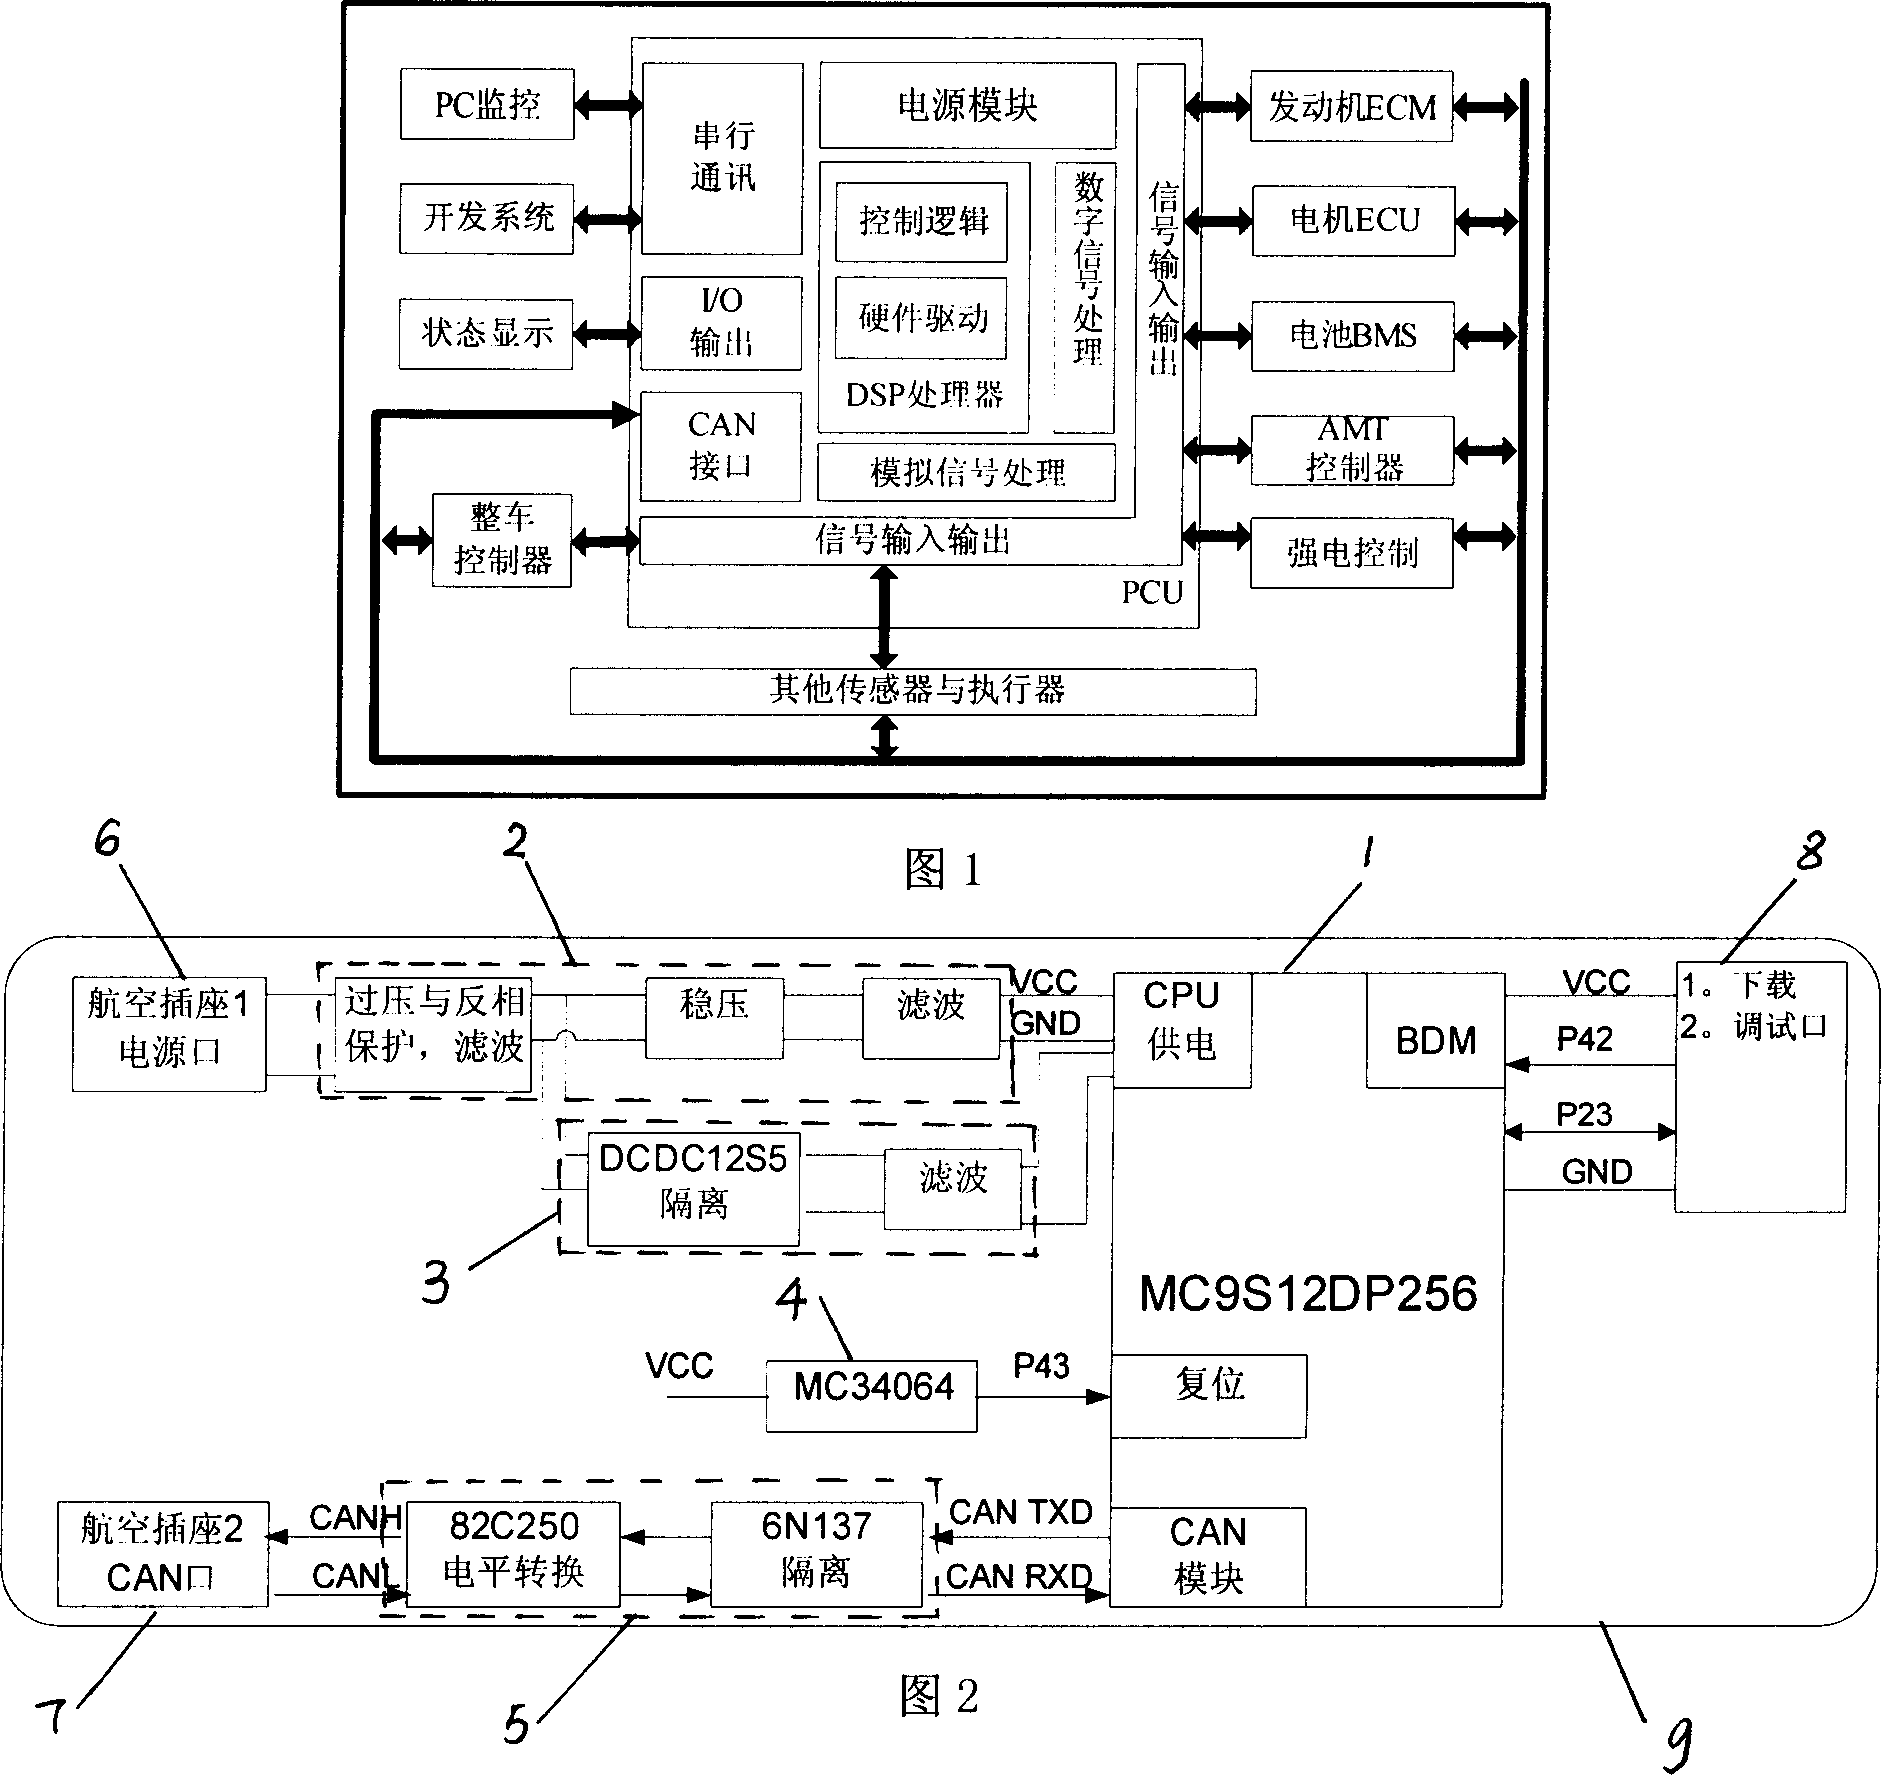 Mixed-power controller assembly for light mixed power